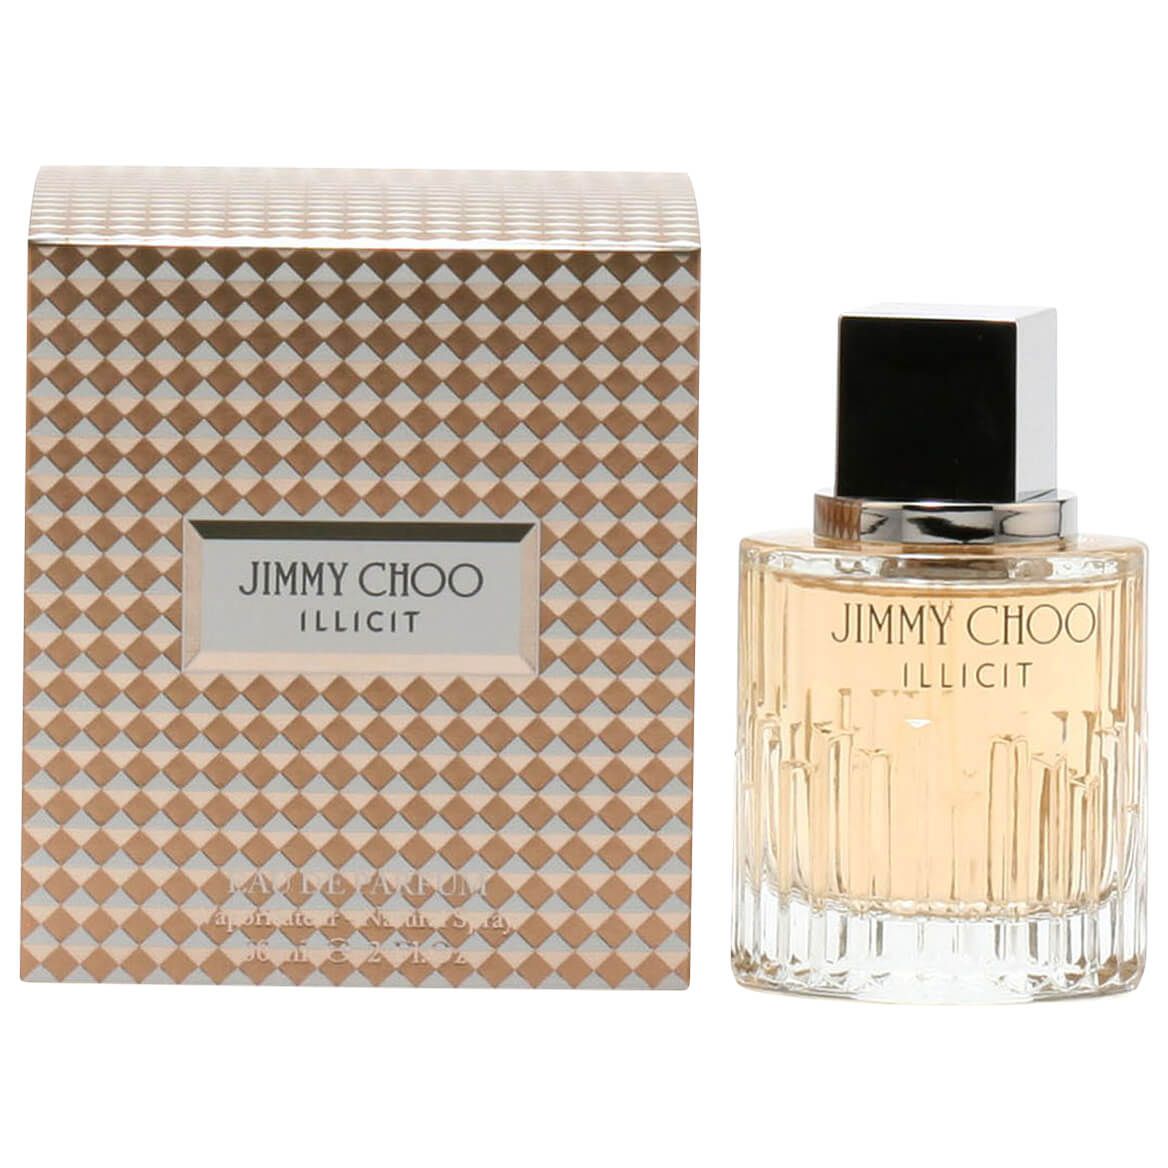 Illicit by Jimmy Choo for Women EDP, 2 oz. + '-' + 373095